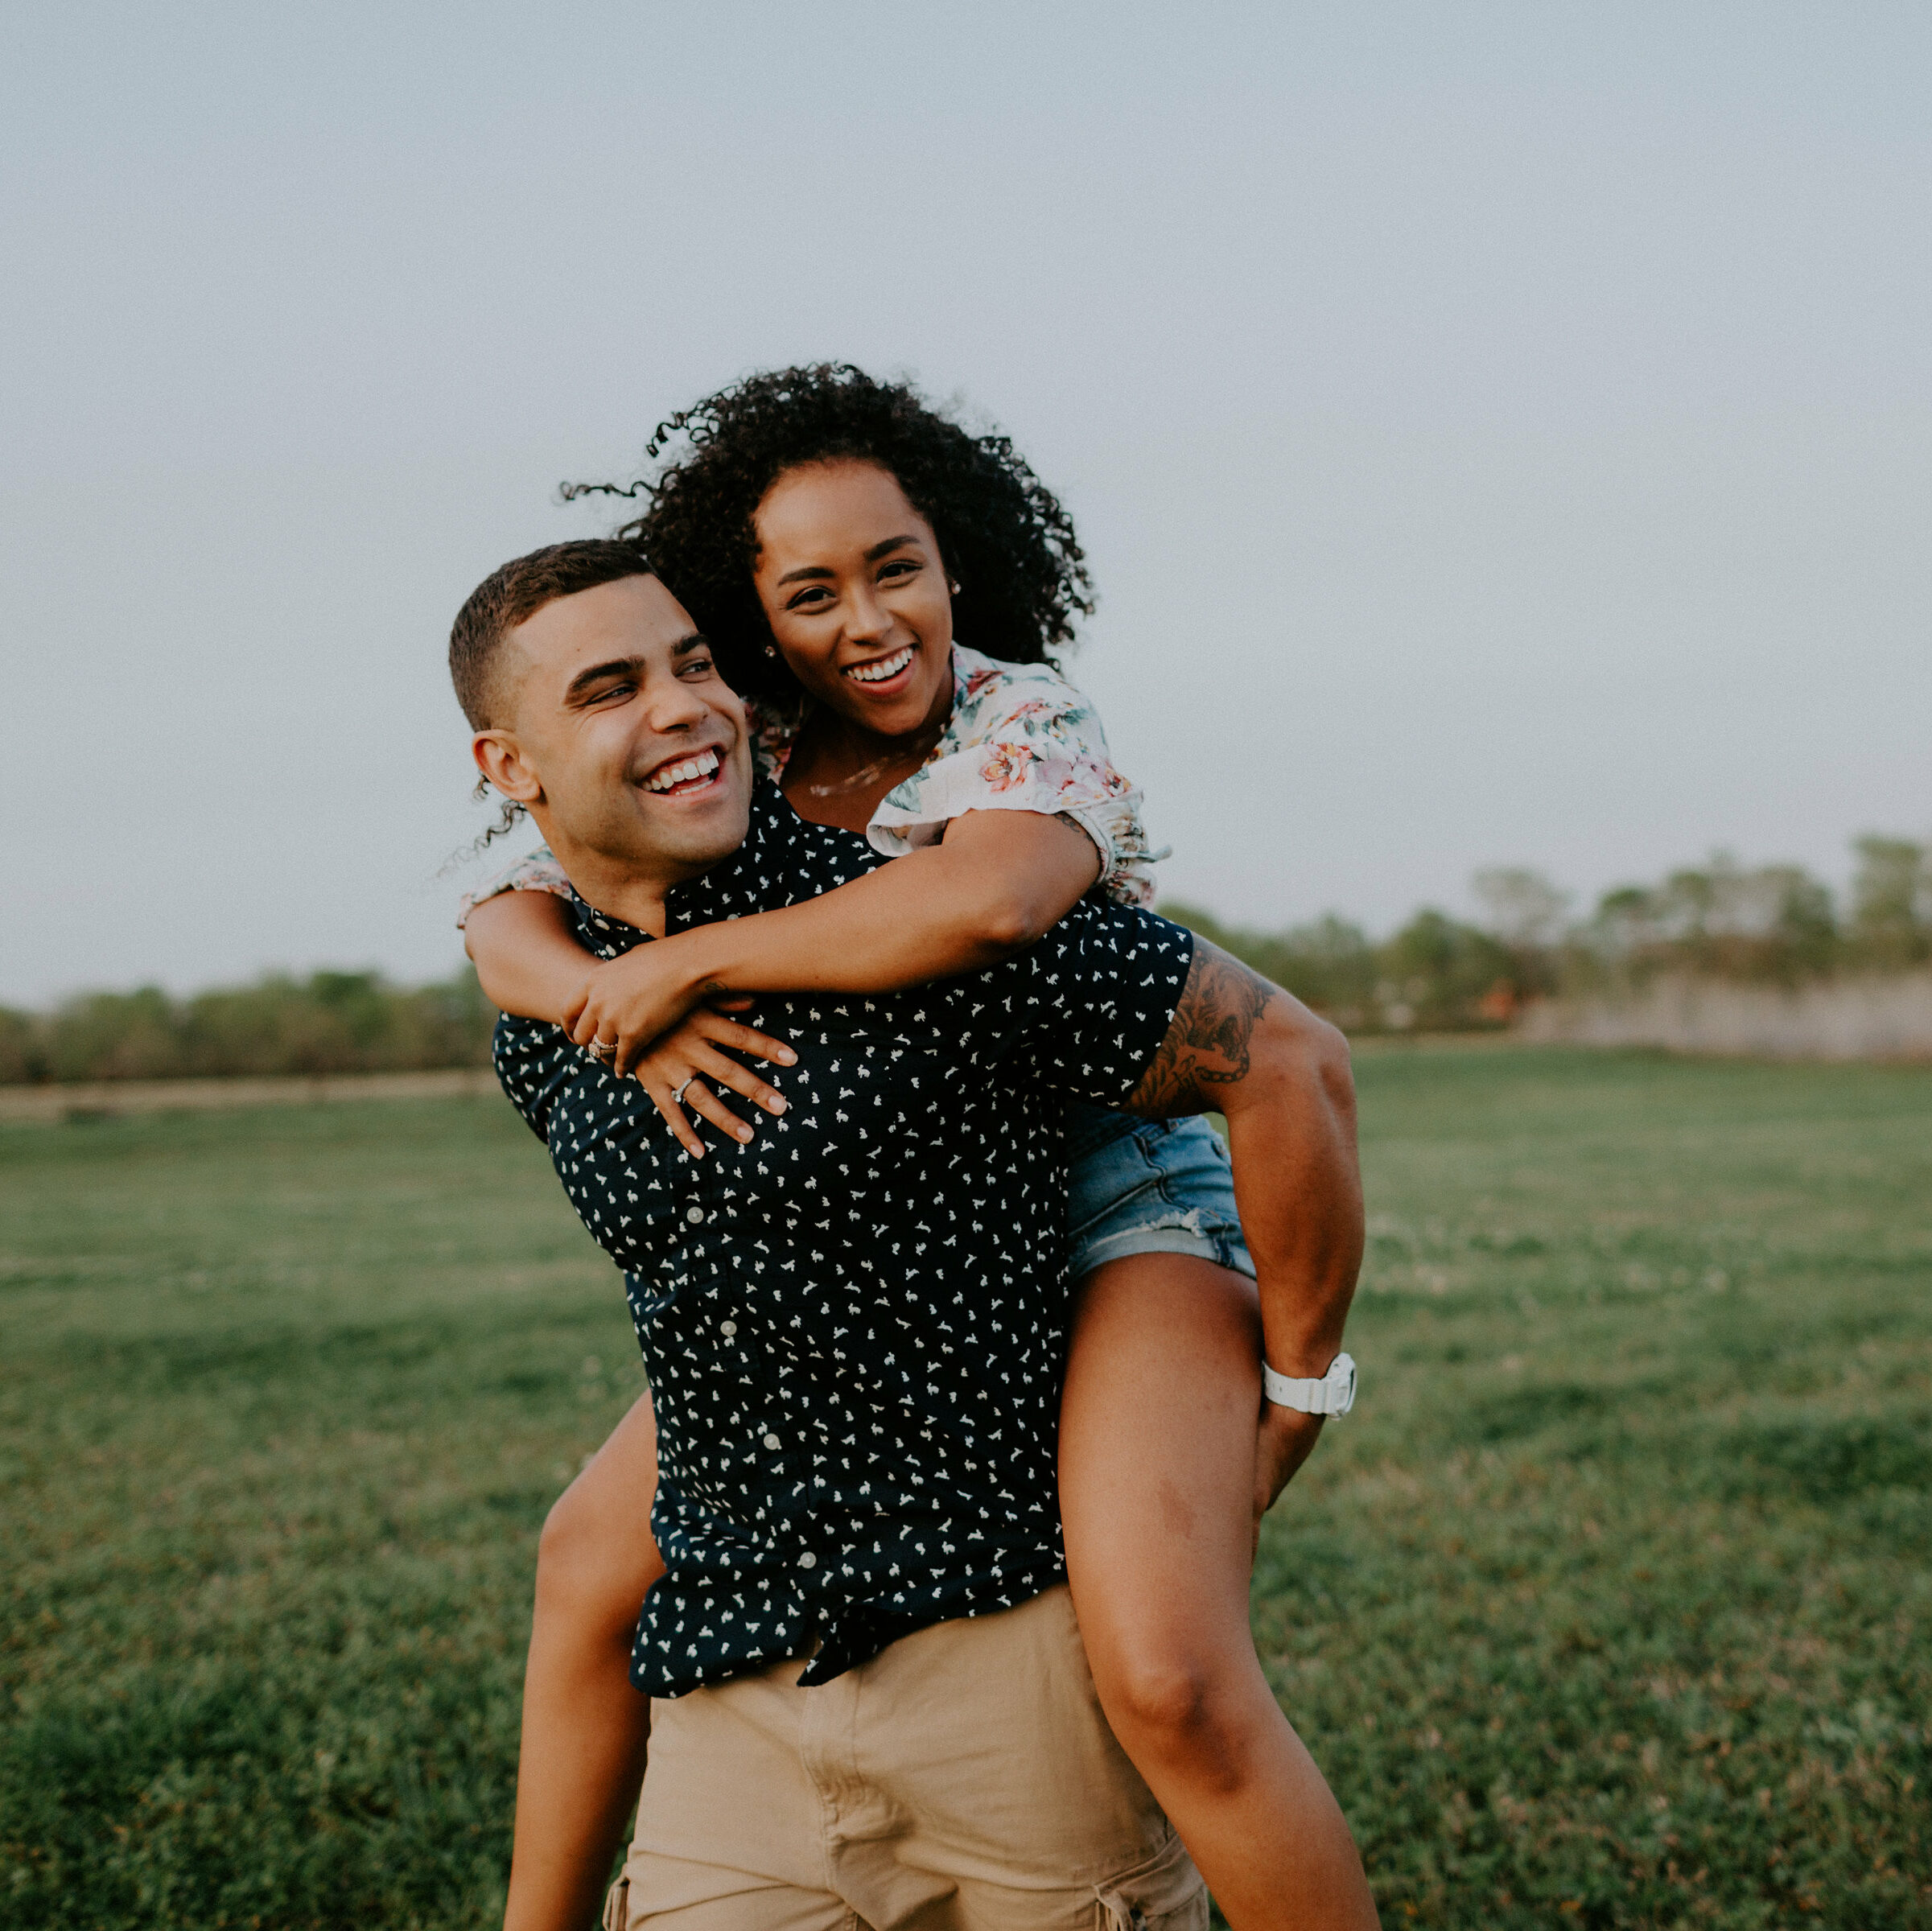 woman getting piggyback ride from a man